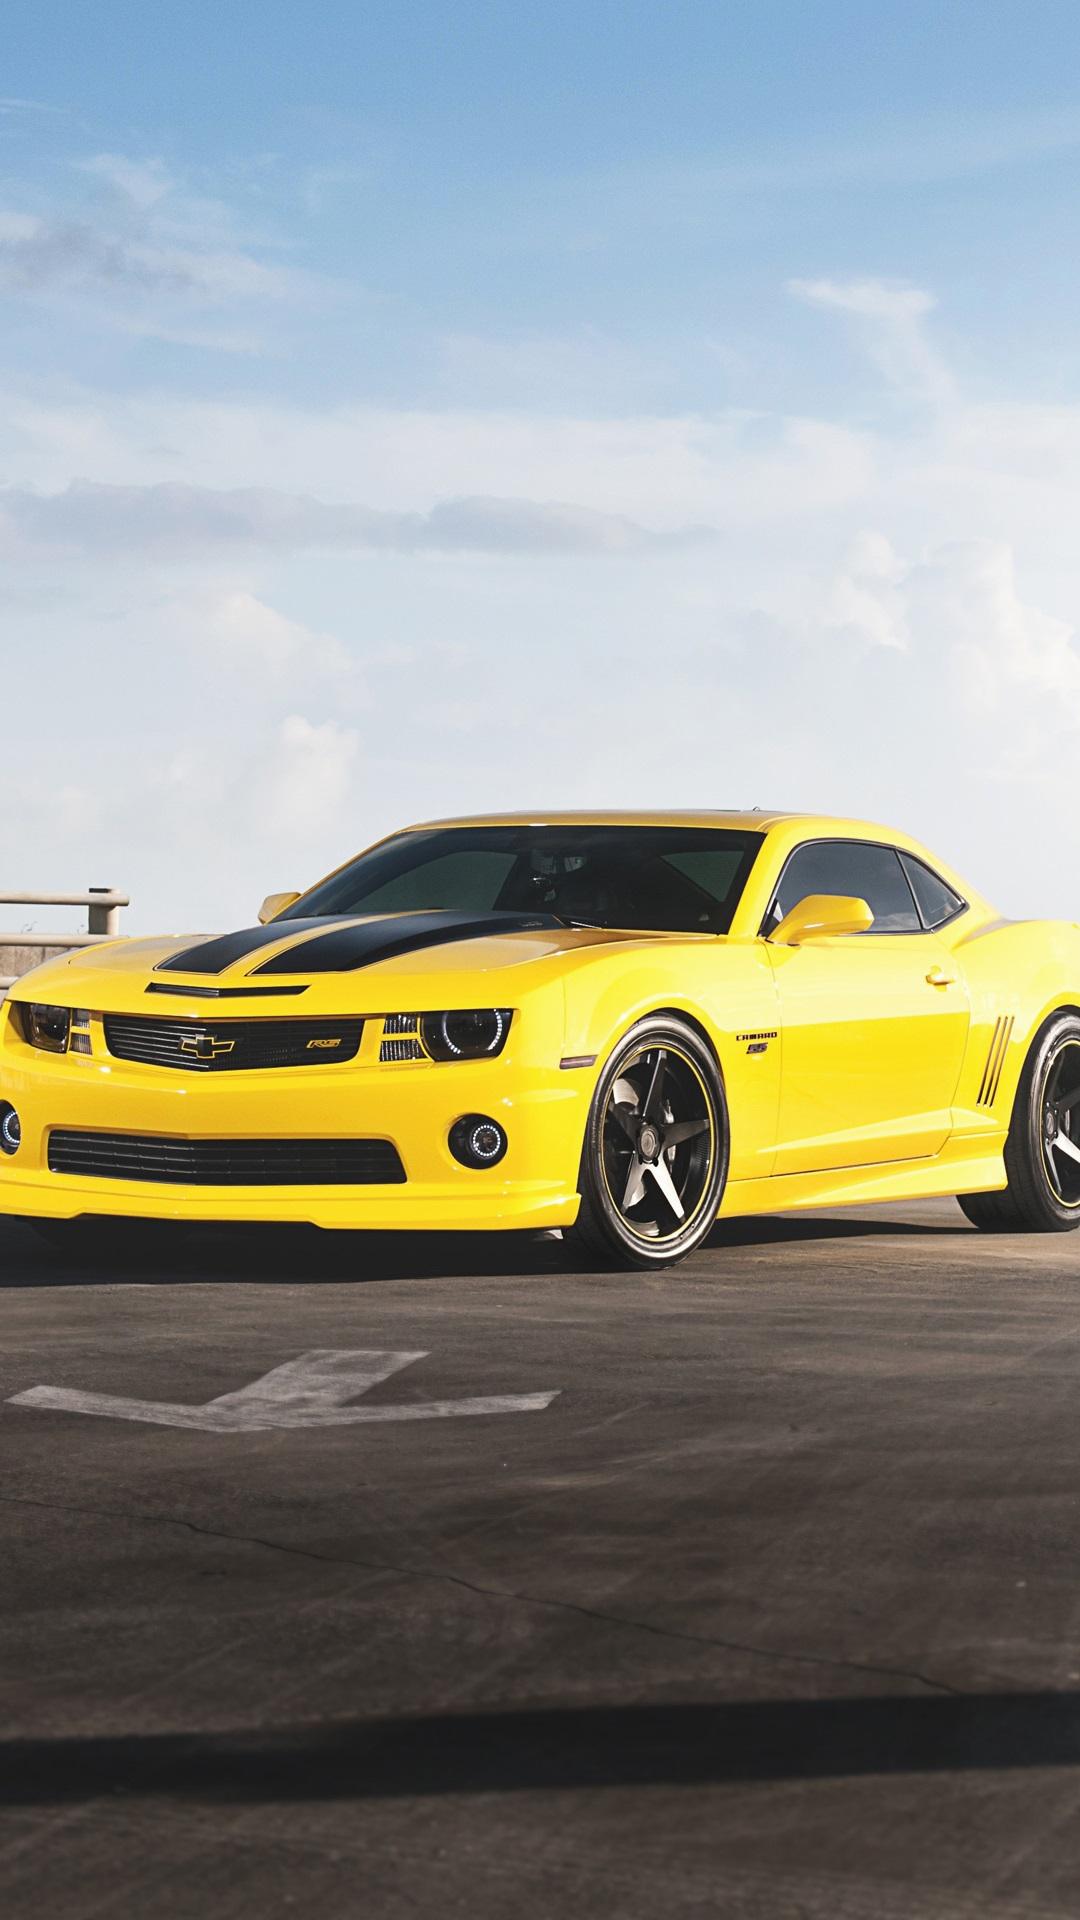 car wallpaper for android,land vehicle,vehicle,car,chevrolet camaro,yellow